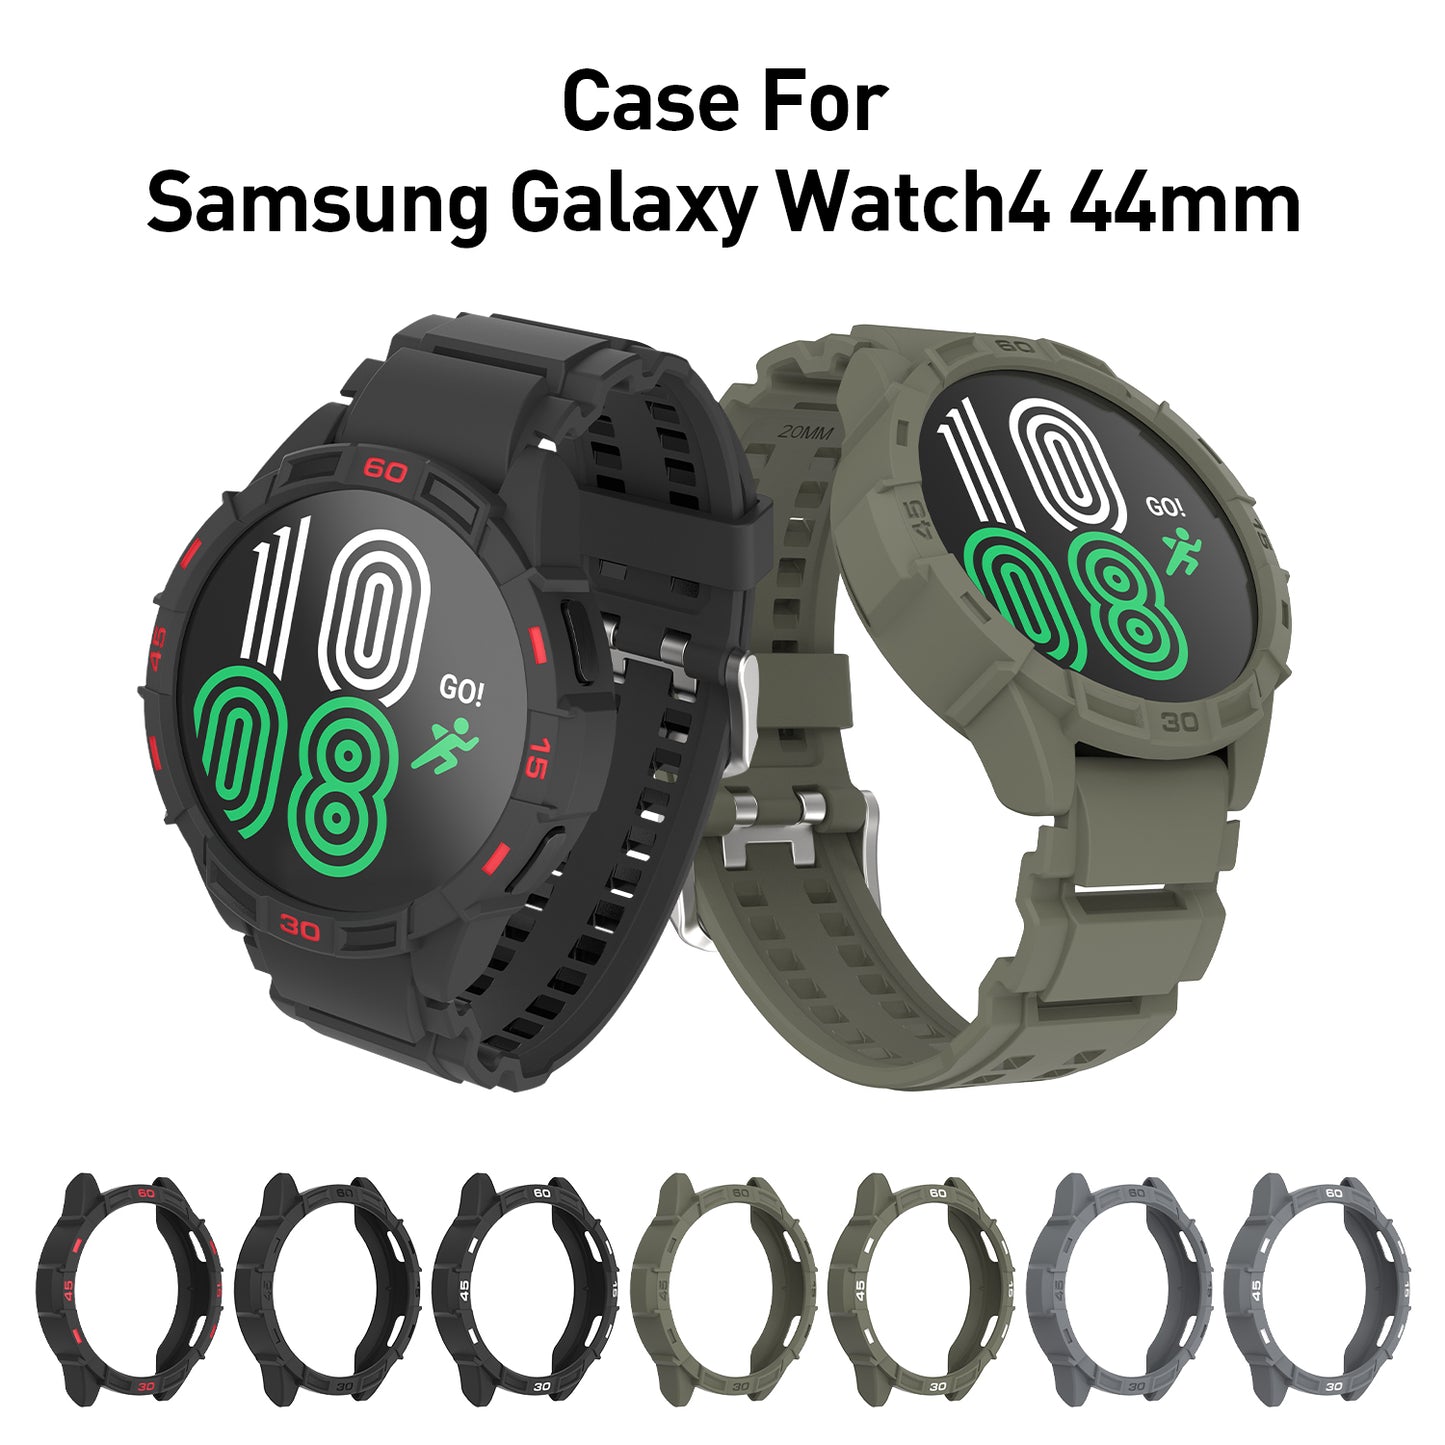 Sikai Multi-color Watch Case for Samsung Galaxy Watch 4 44mm Protective Cover with Strap for Samsung Galaxy Watch 4